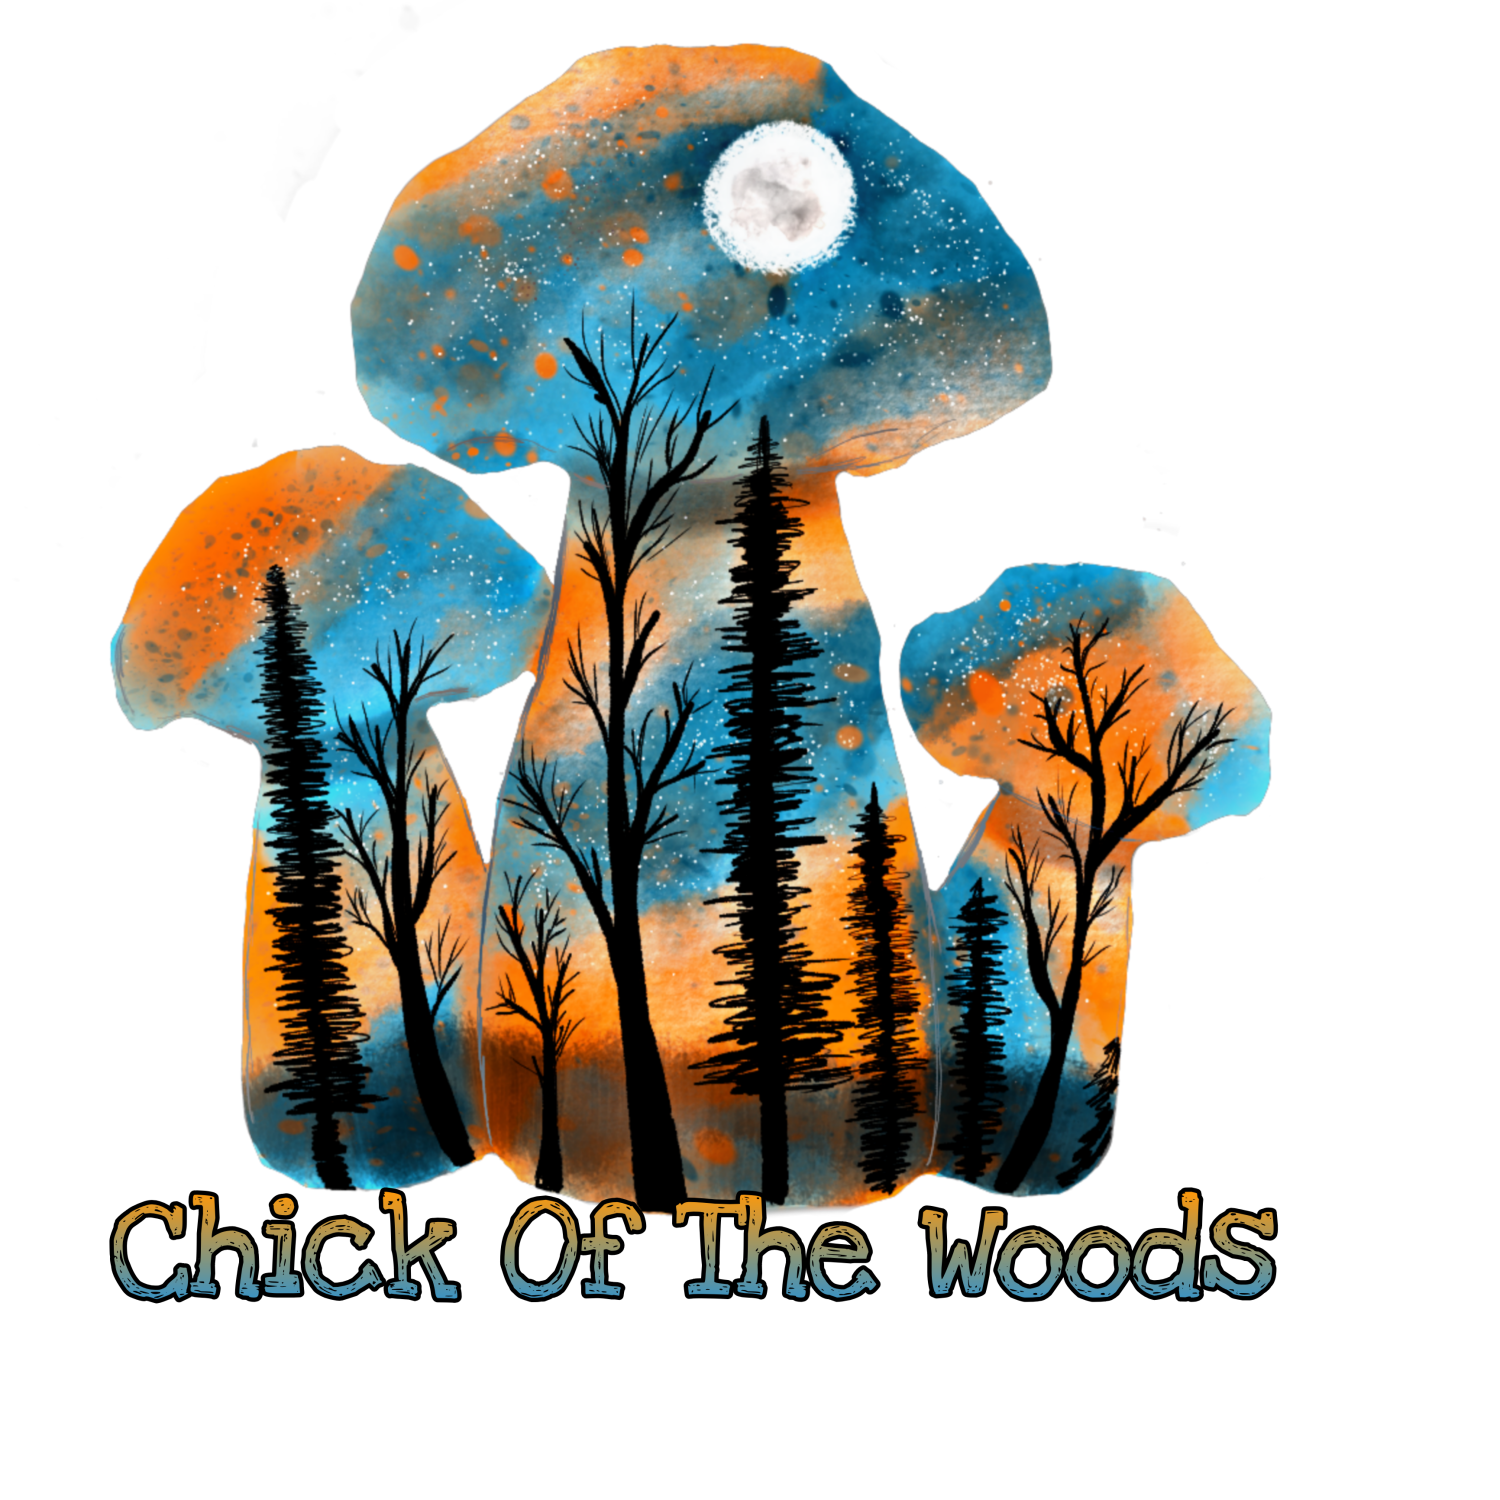 Chick of the Woods